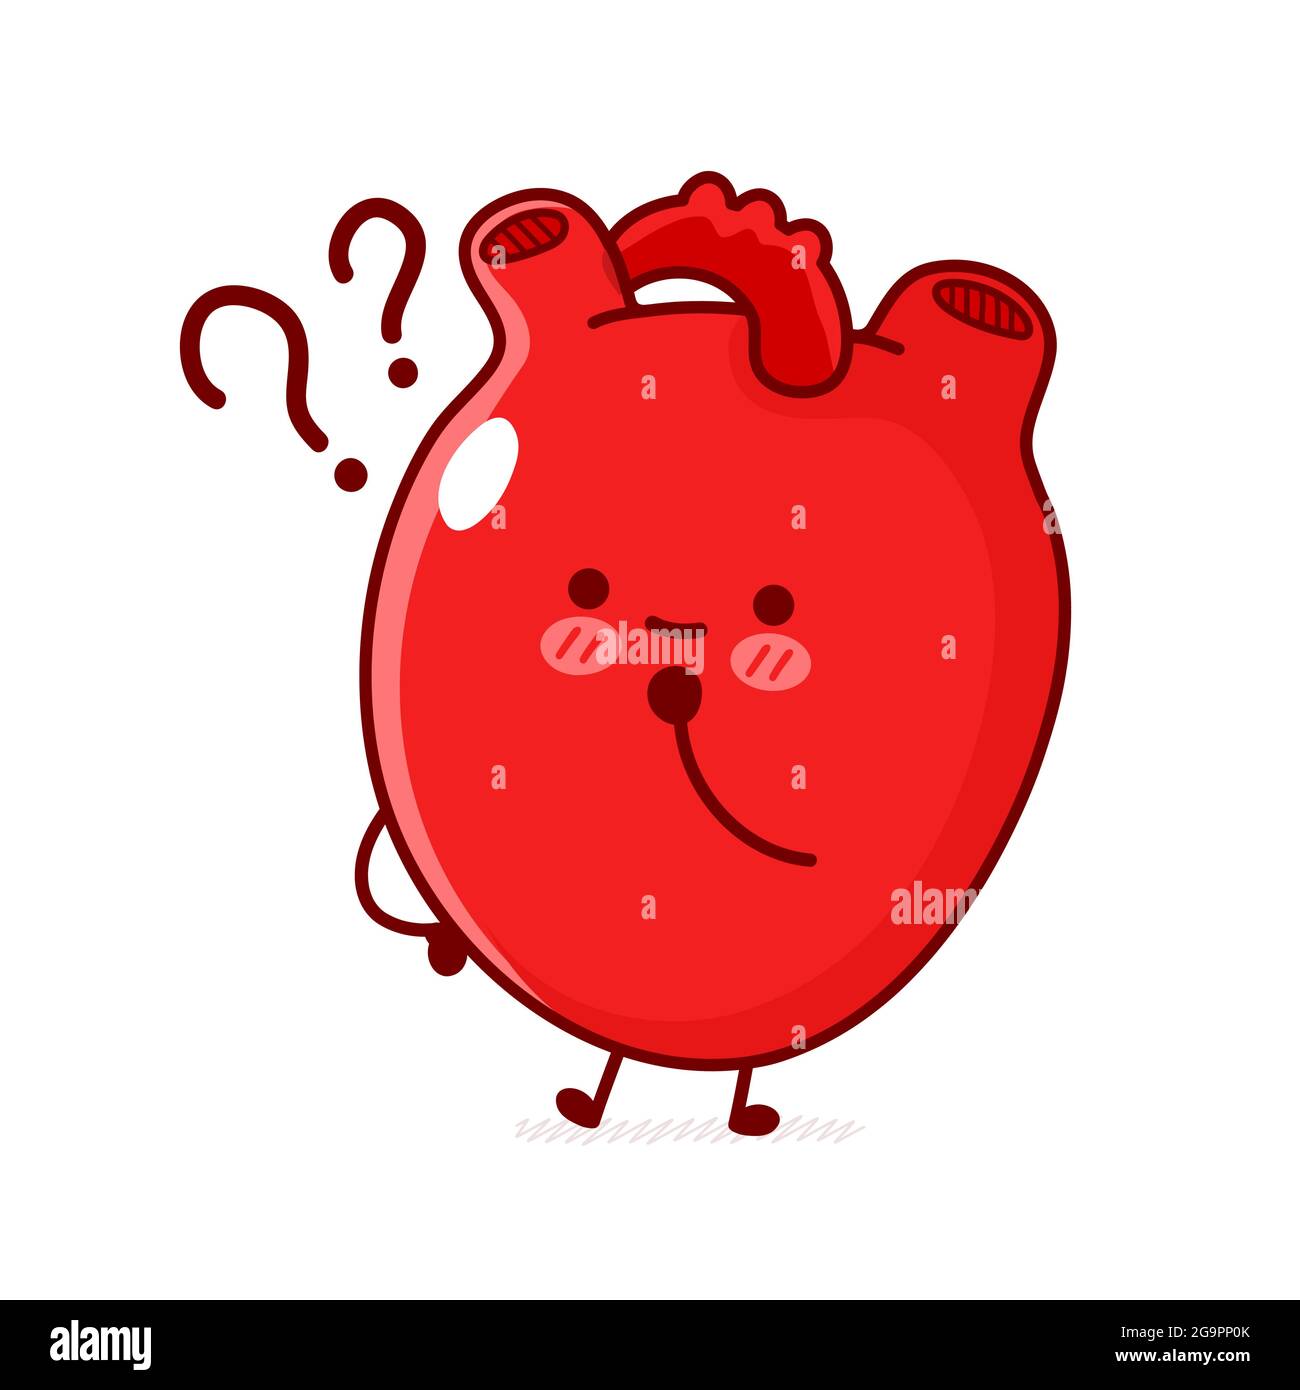 Cute funny human heart organ with question mark. Vector flat line doodle cartoon kawaii character illustration. Isolated on white background. Human heart organ,anatomy cartoon mascot character concept Stock Vector